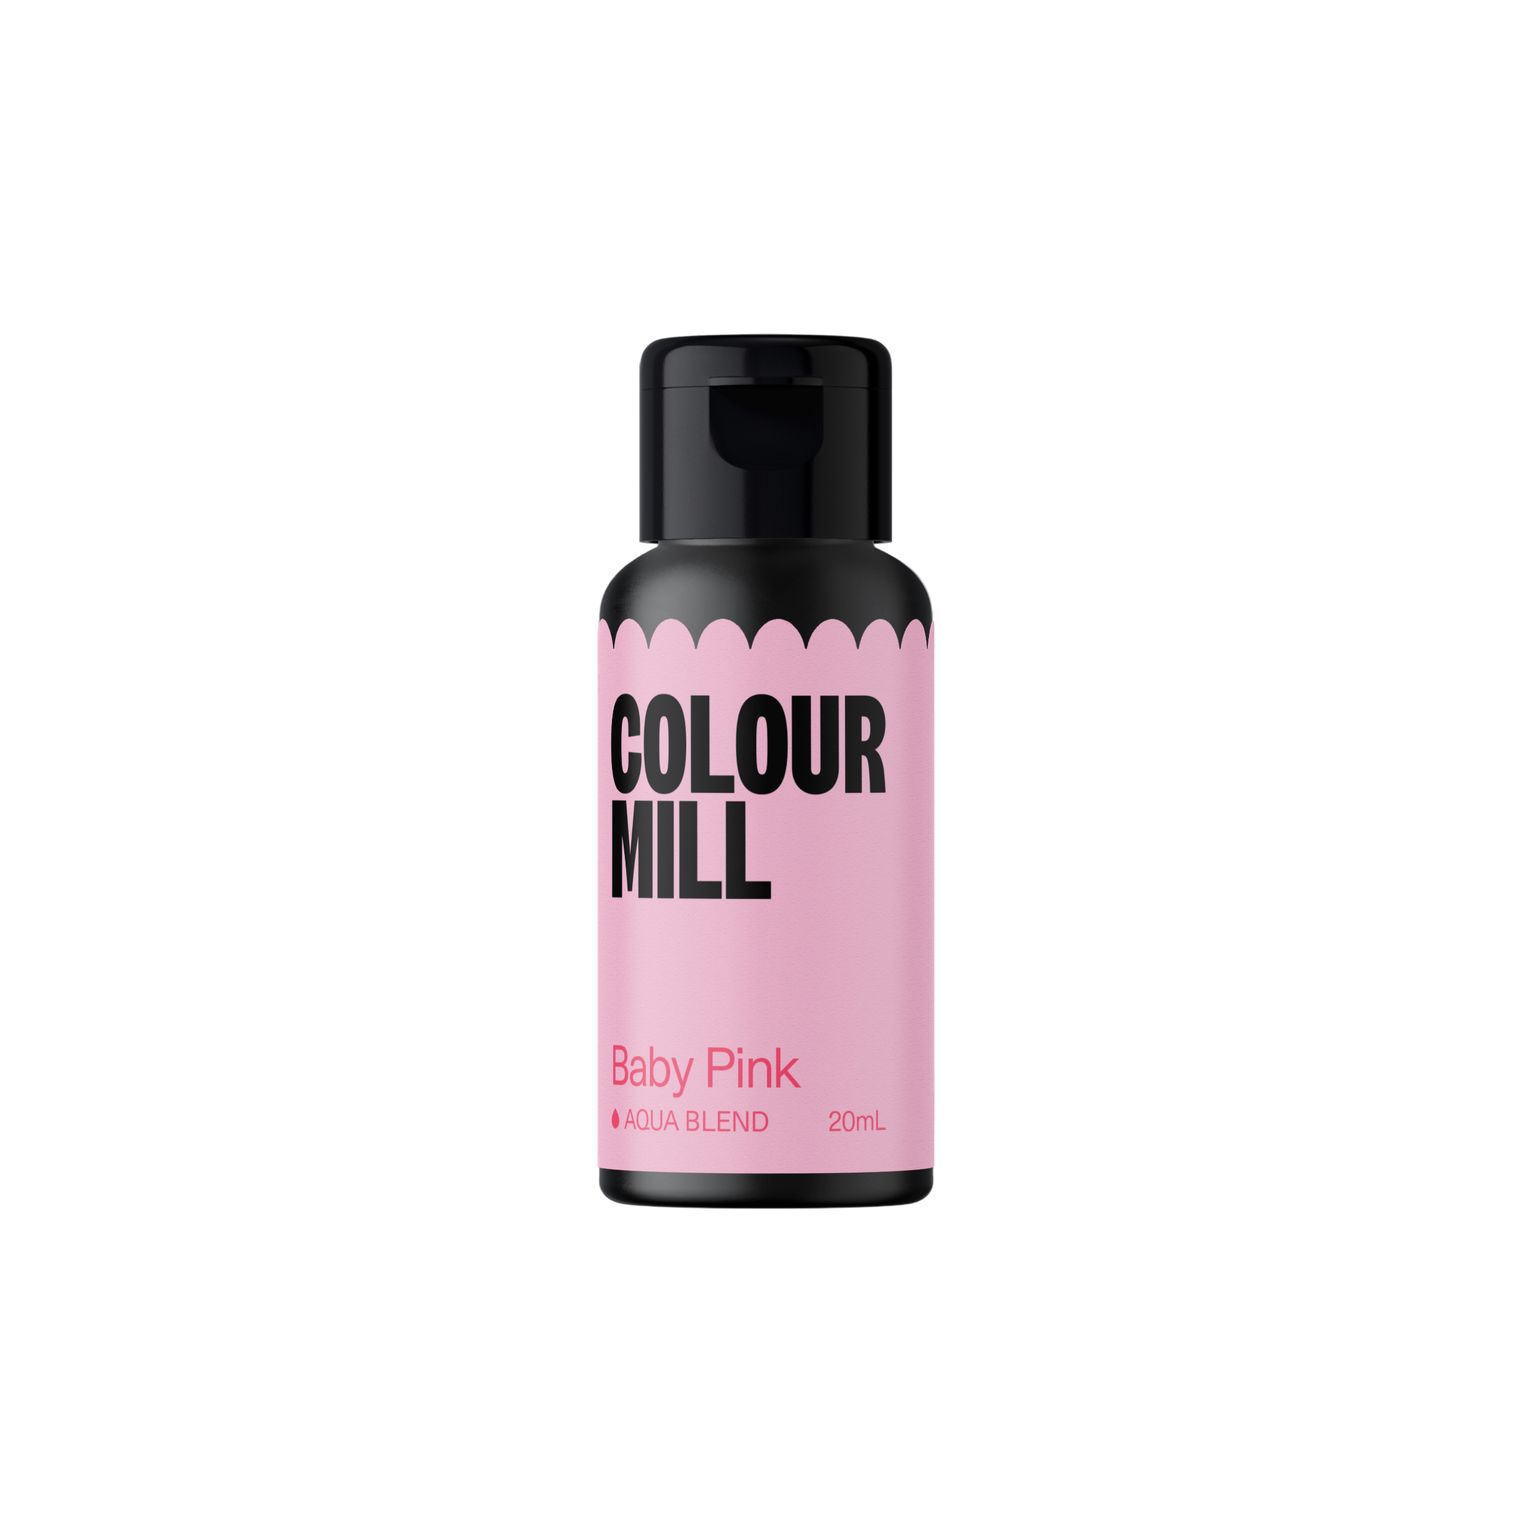 Colour mill Aqua blend food colouring Baby Pink 20ml